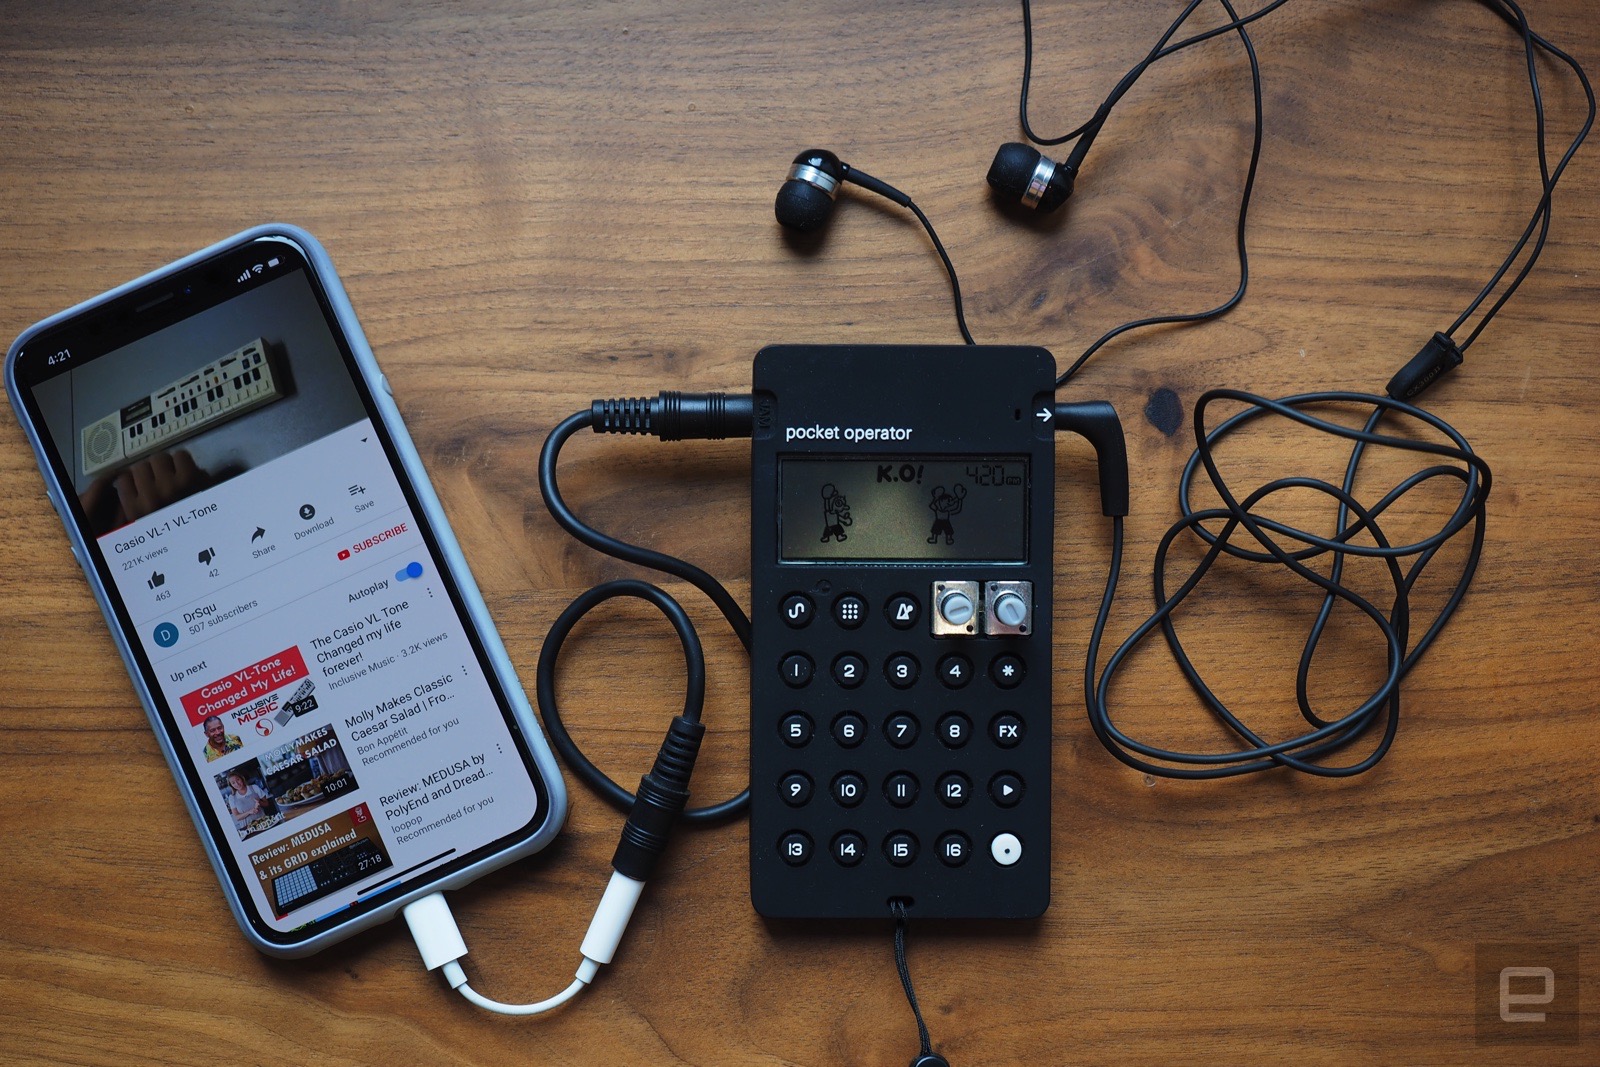 What we're buying: A potent audio sampler that fits in your pocket